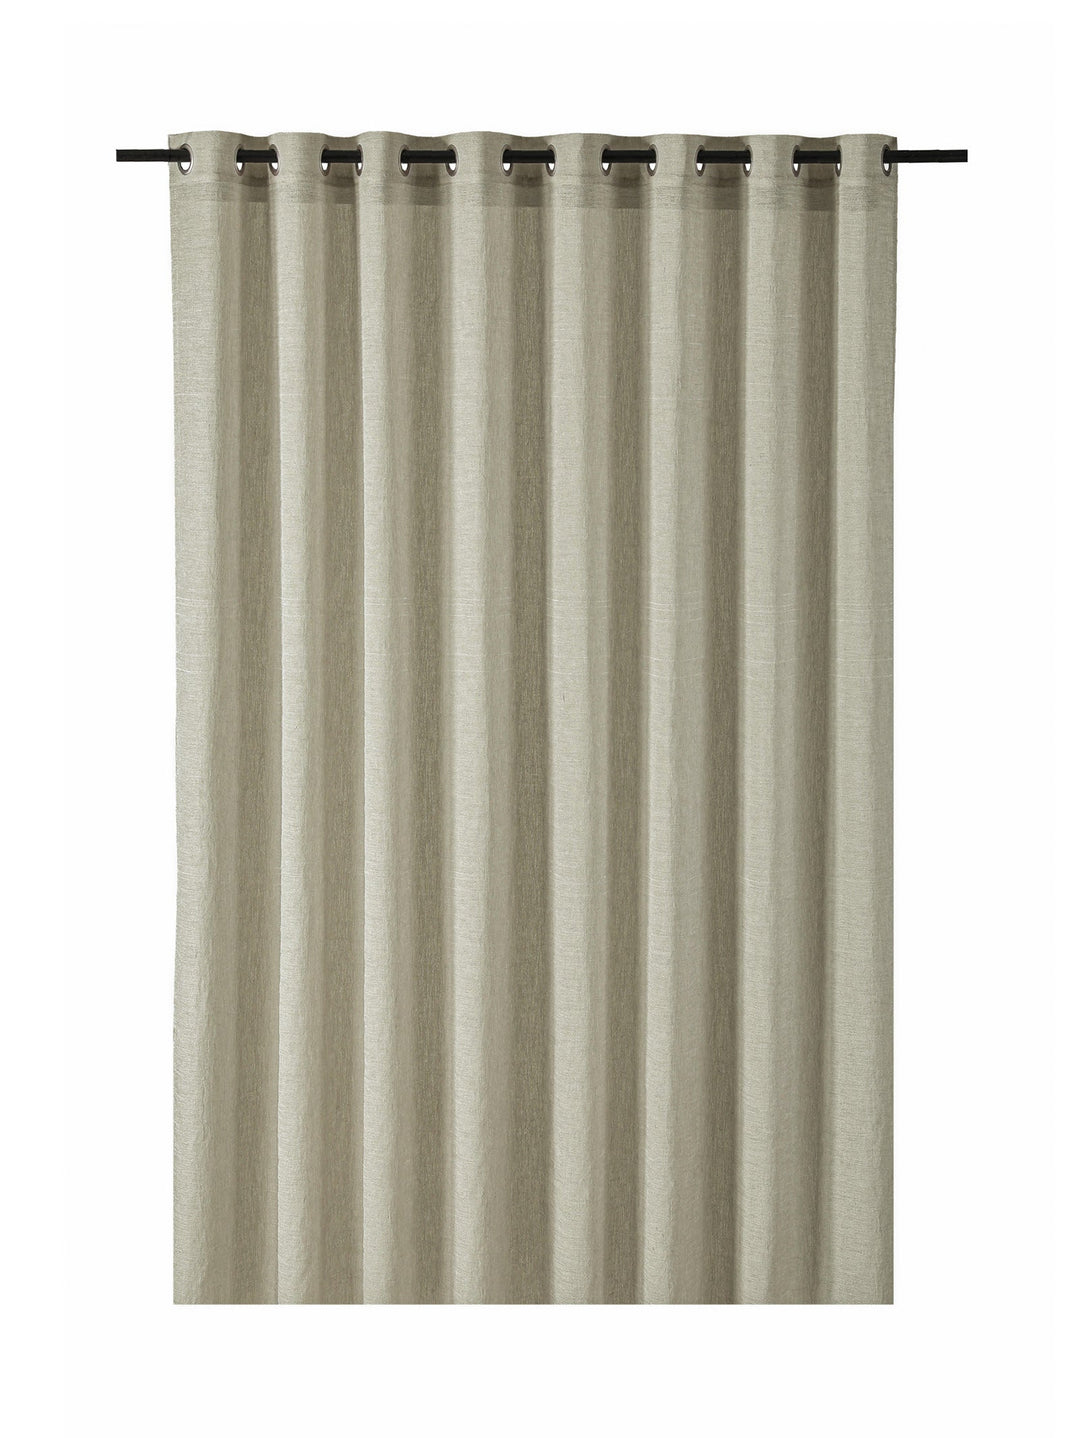 Milano Ready Made Lined Curtain in Summer Sand - Curtains & Drapes- Hertex Haus Online - Curtains